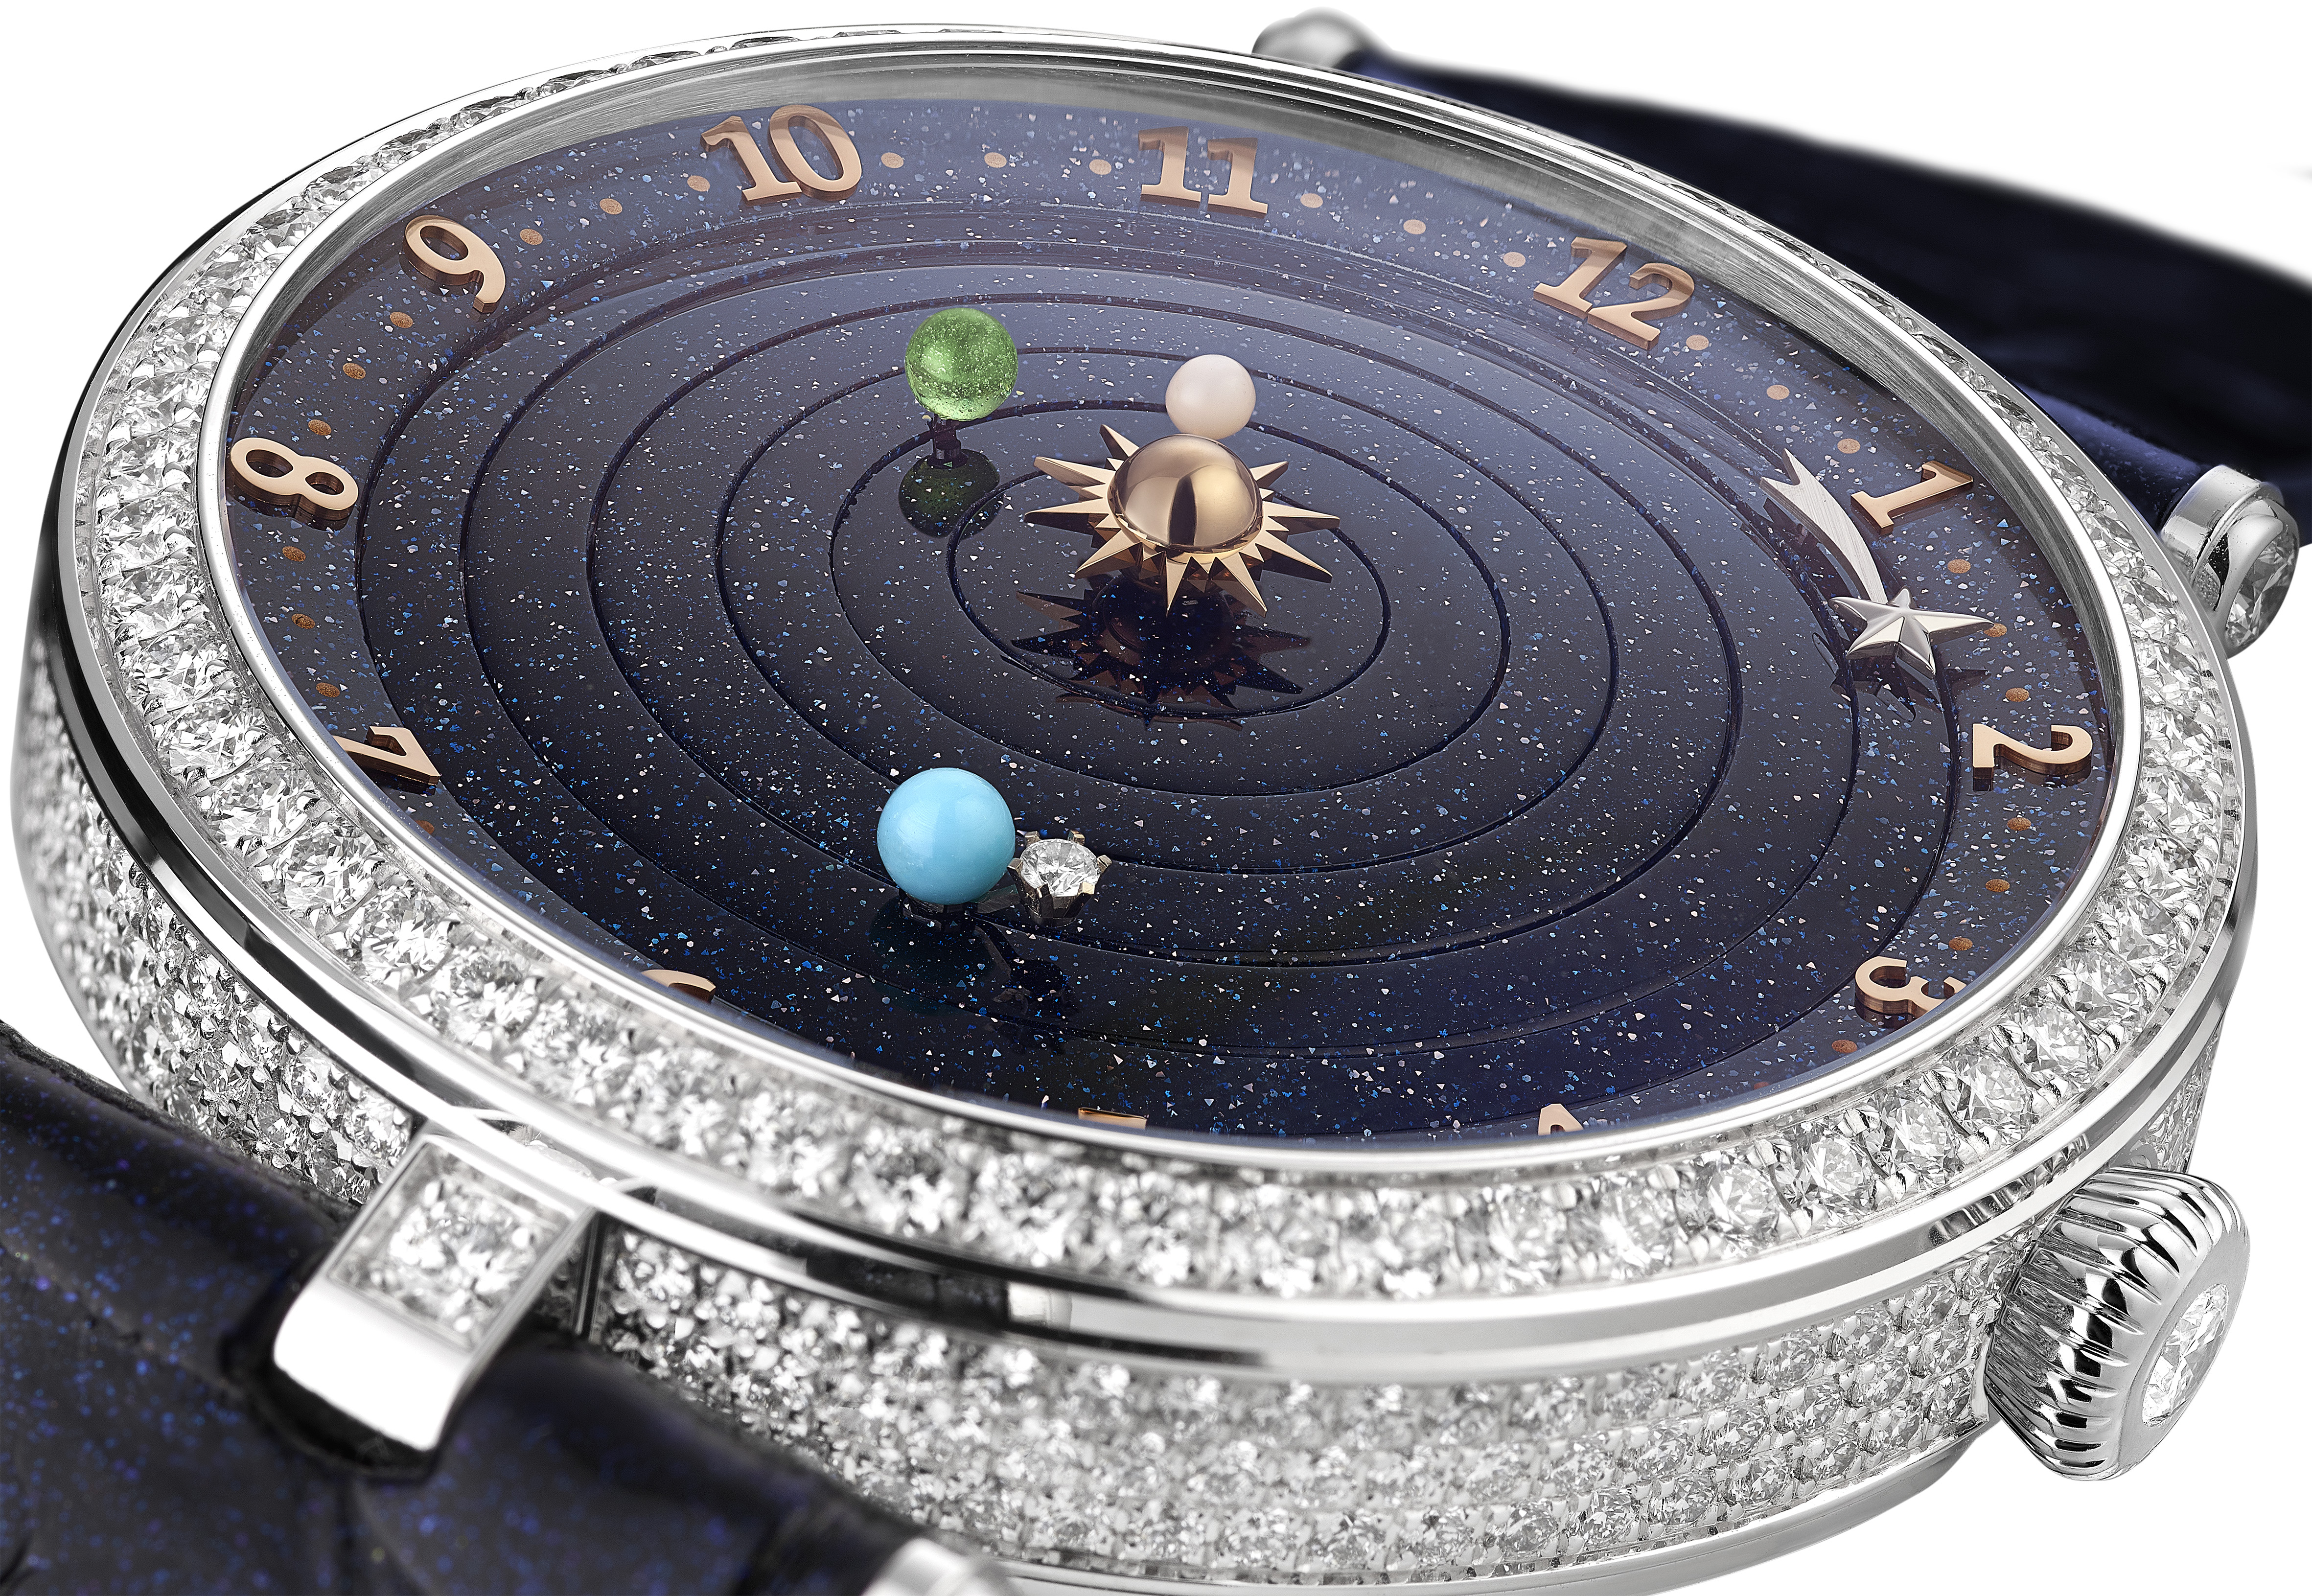 Not diamonds or precious stones, but this $245,000 watch has